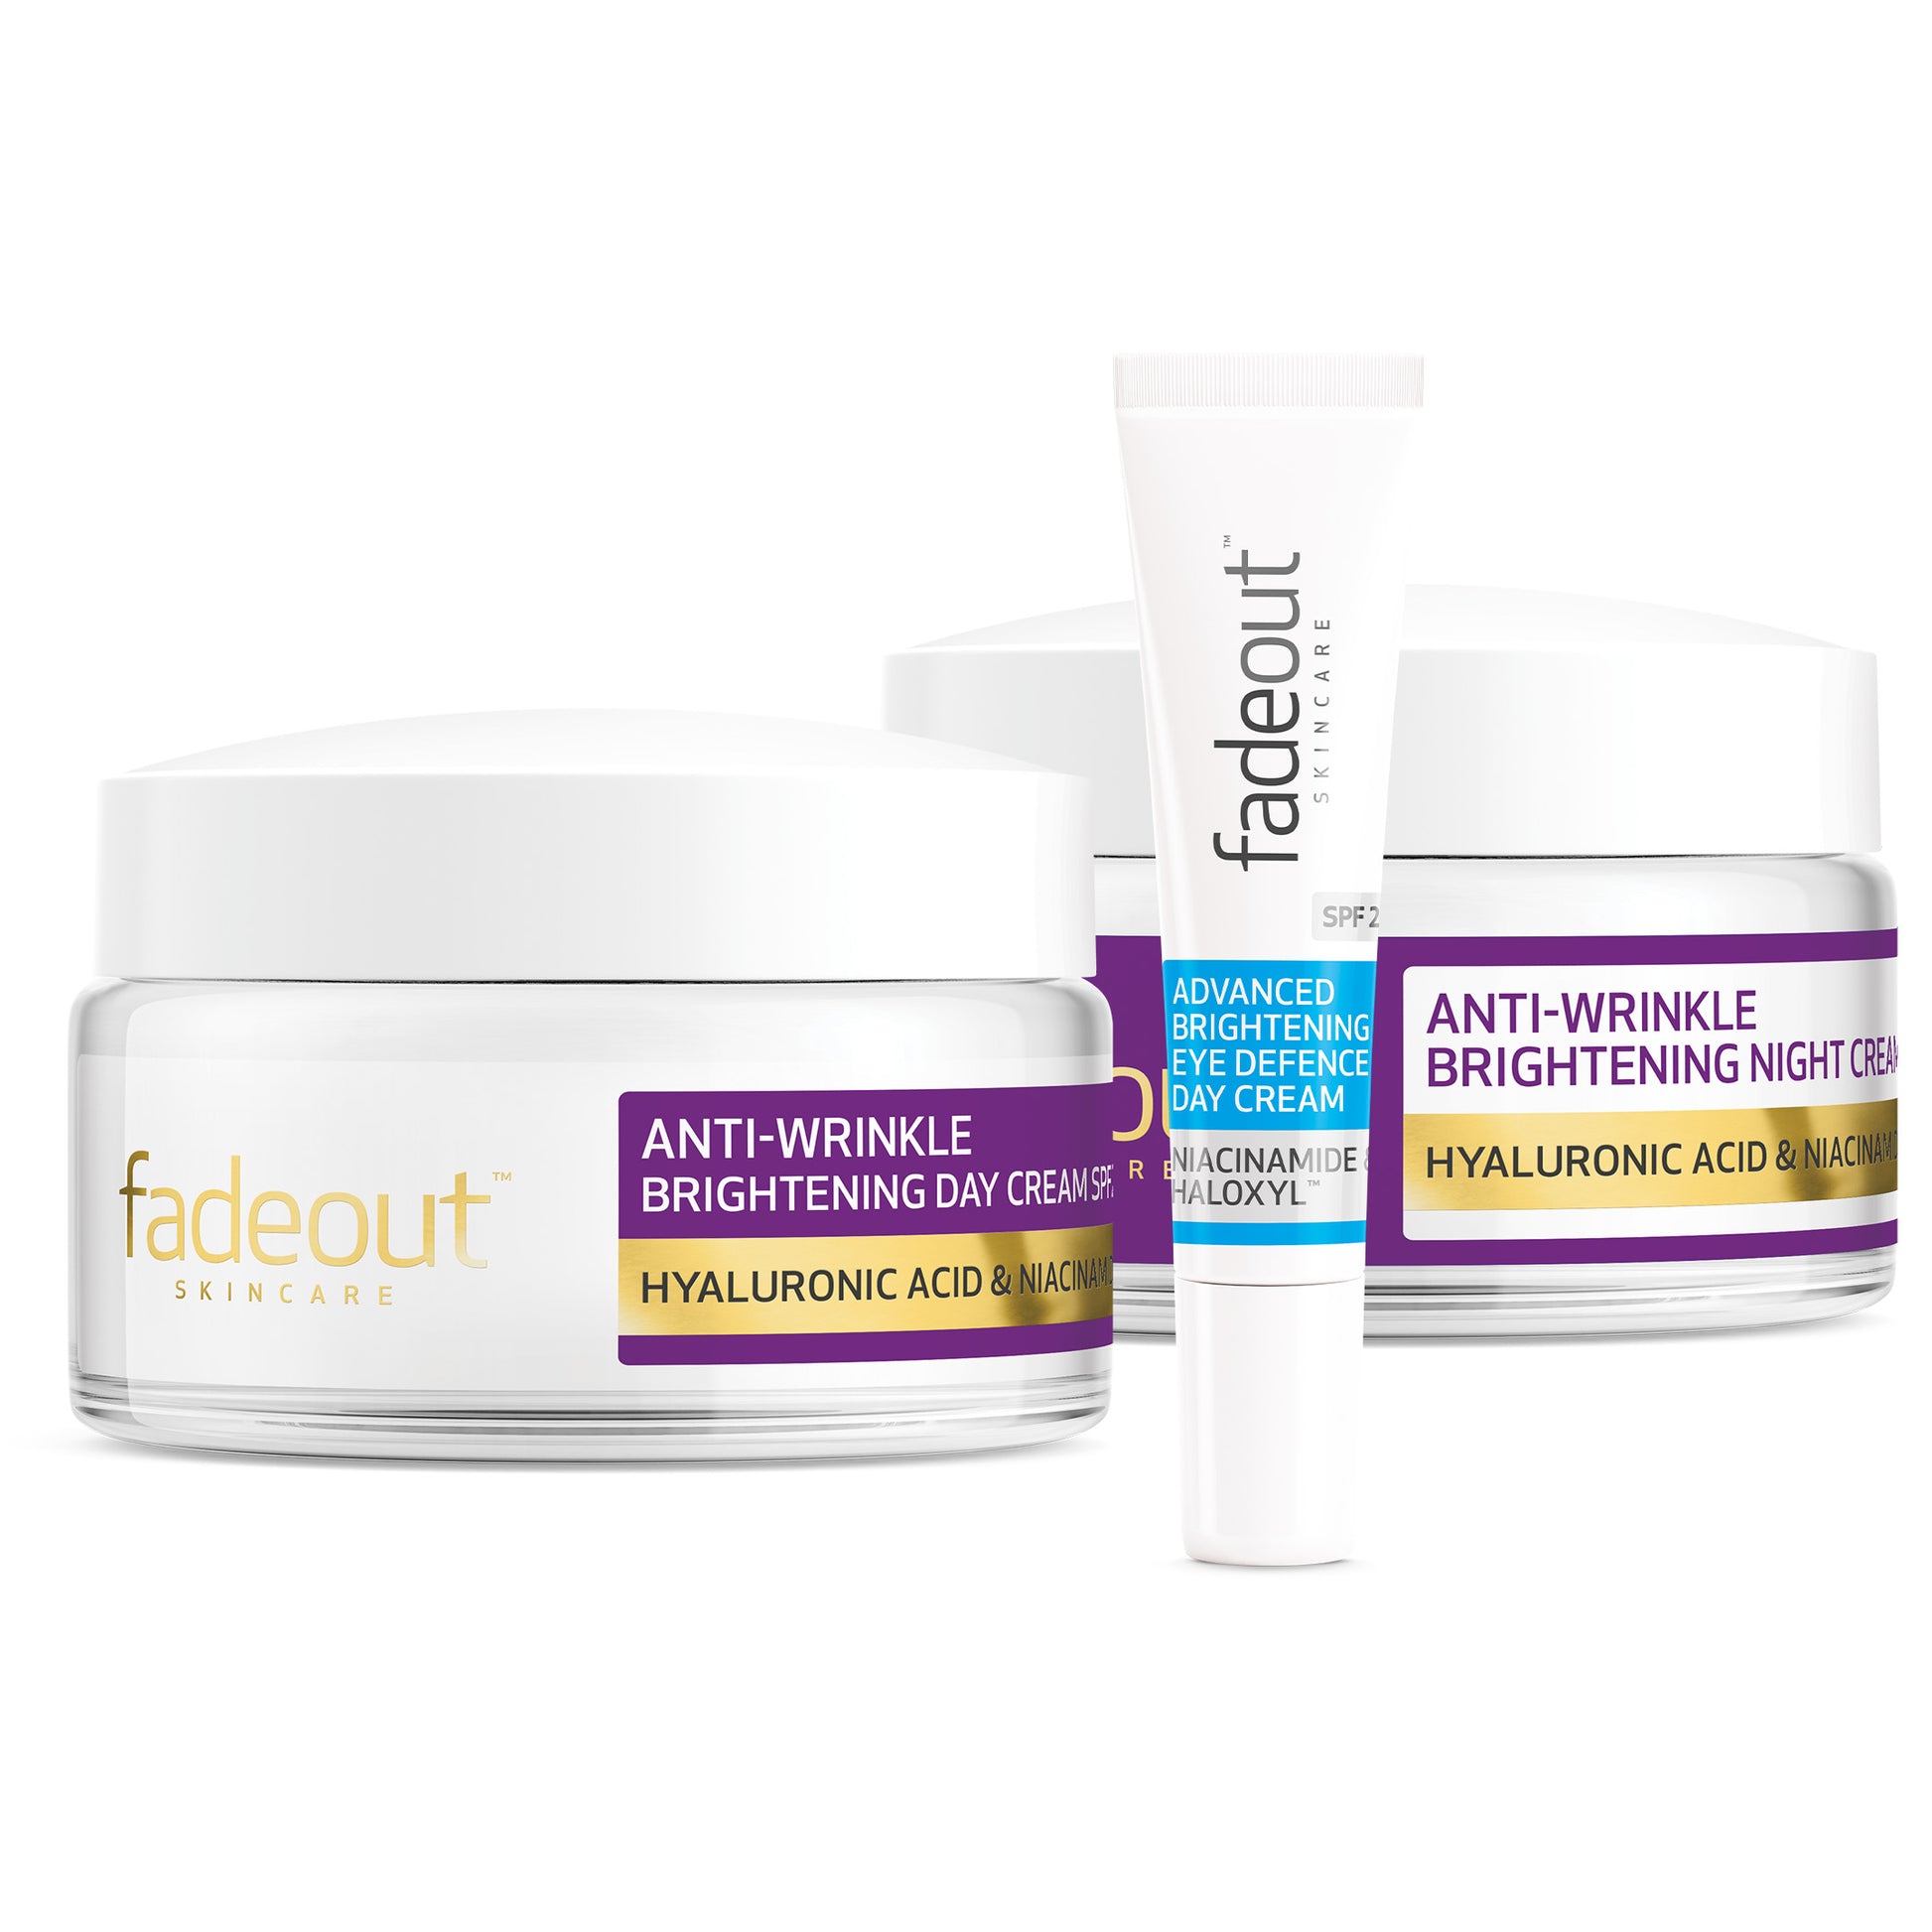 Anti-Wrinkle Brightening Set - Fade Out Skincare